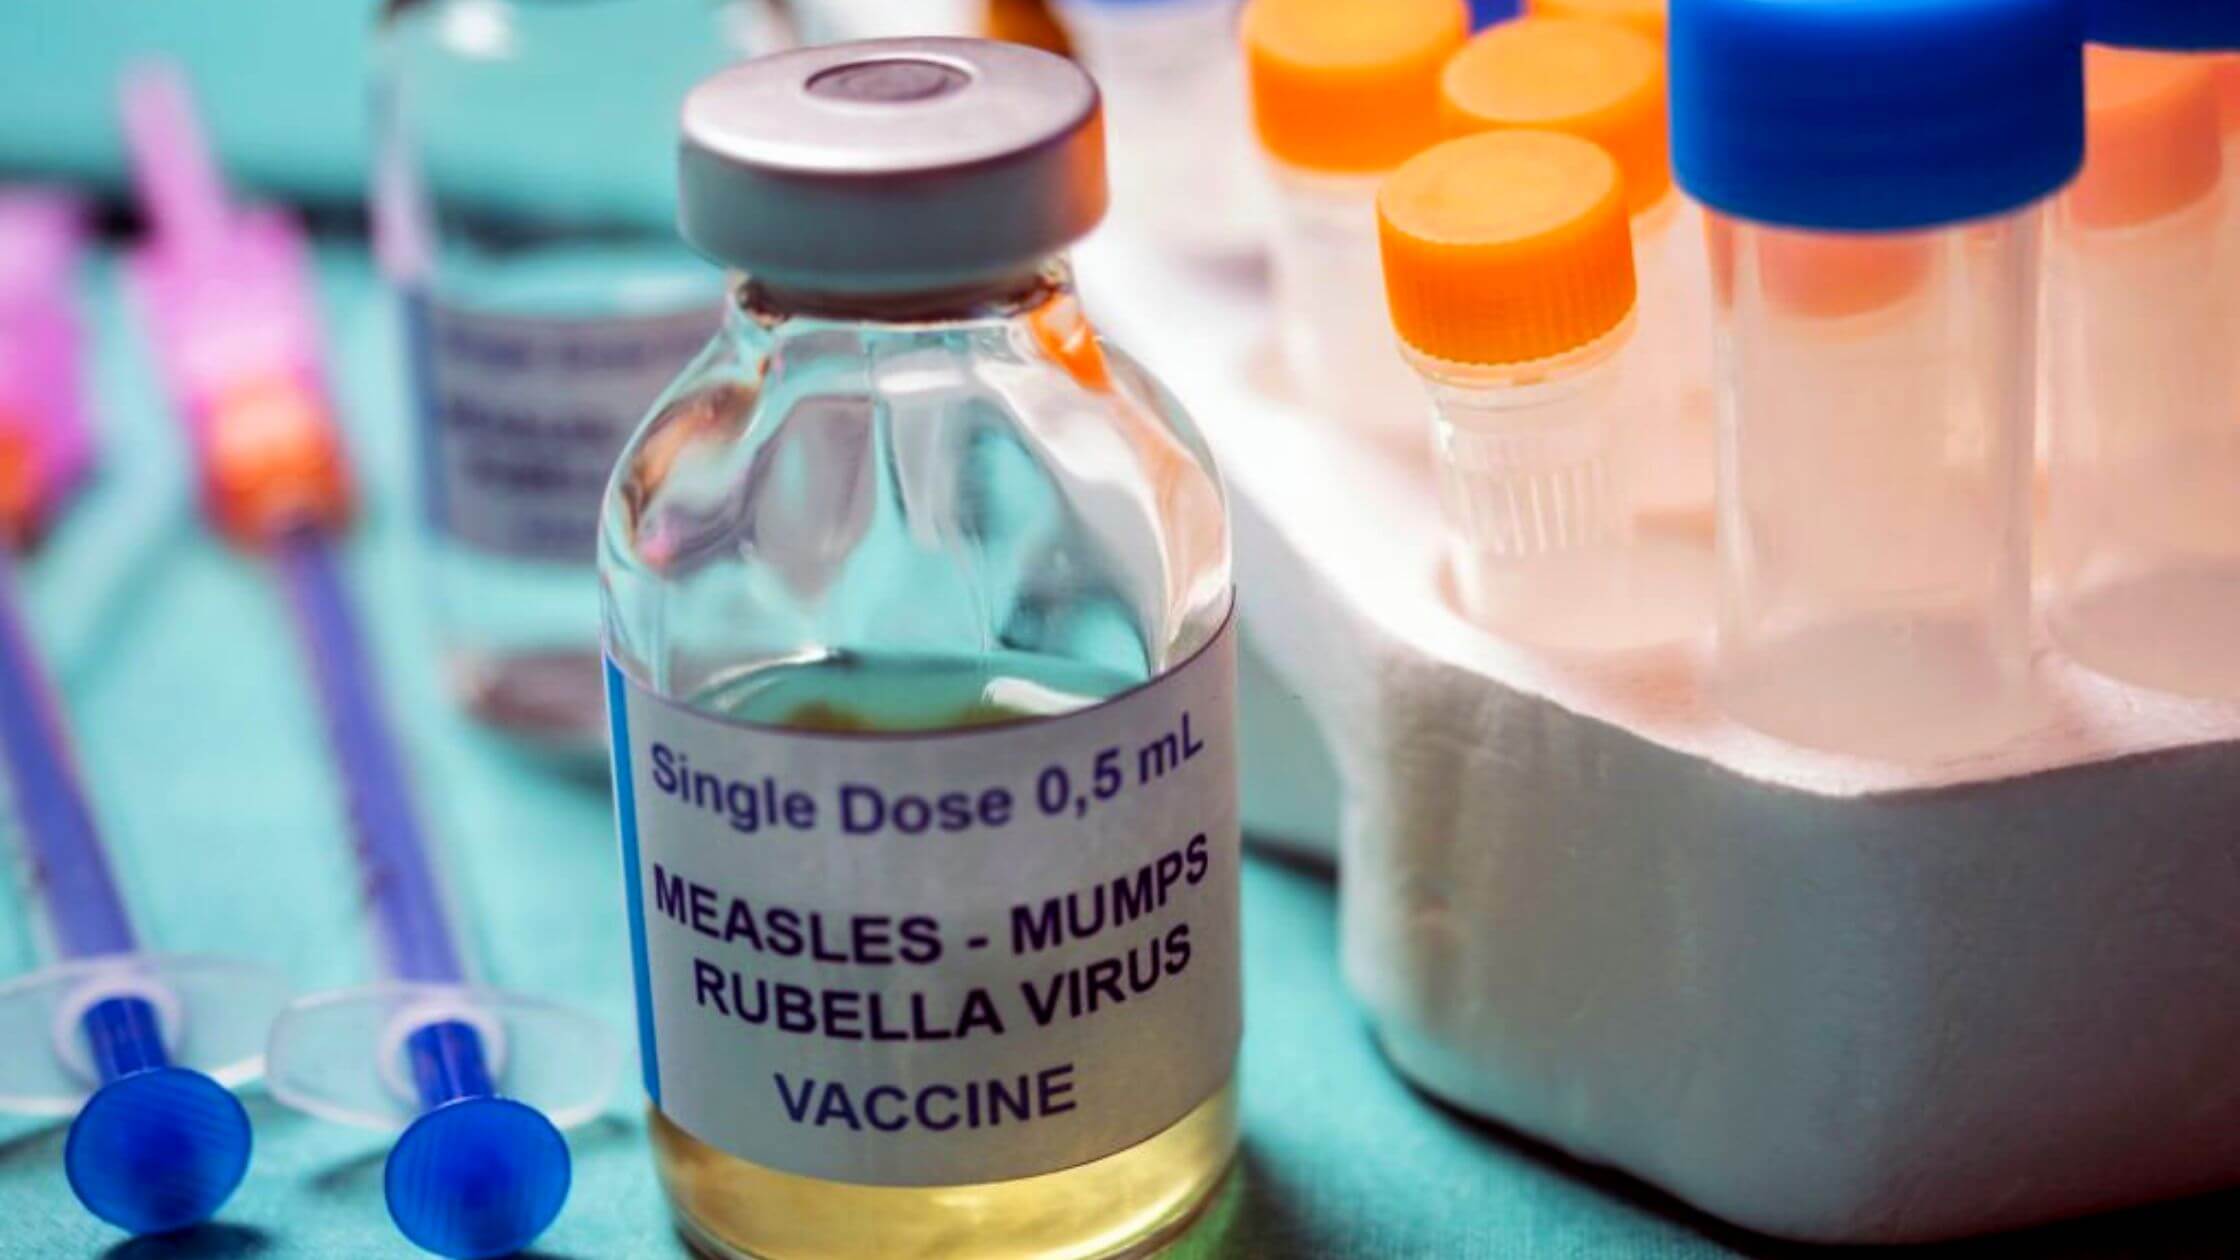 WHO And CDC Warn That Measles Is An Impending Threat Worldwide